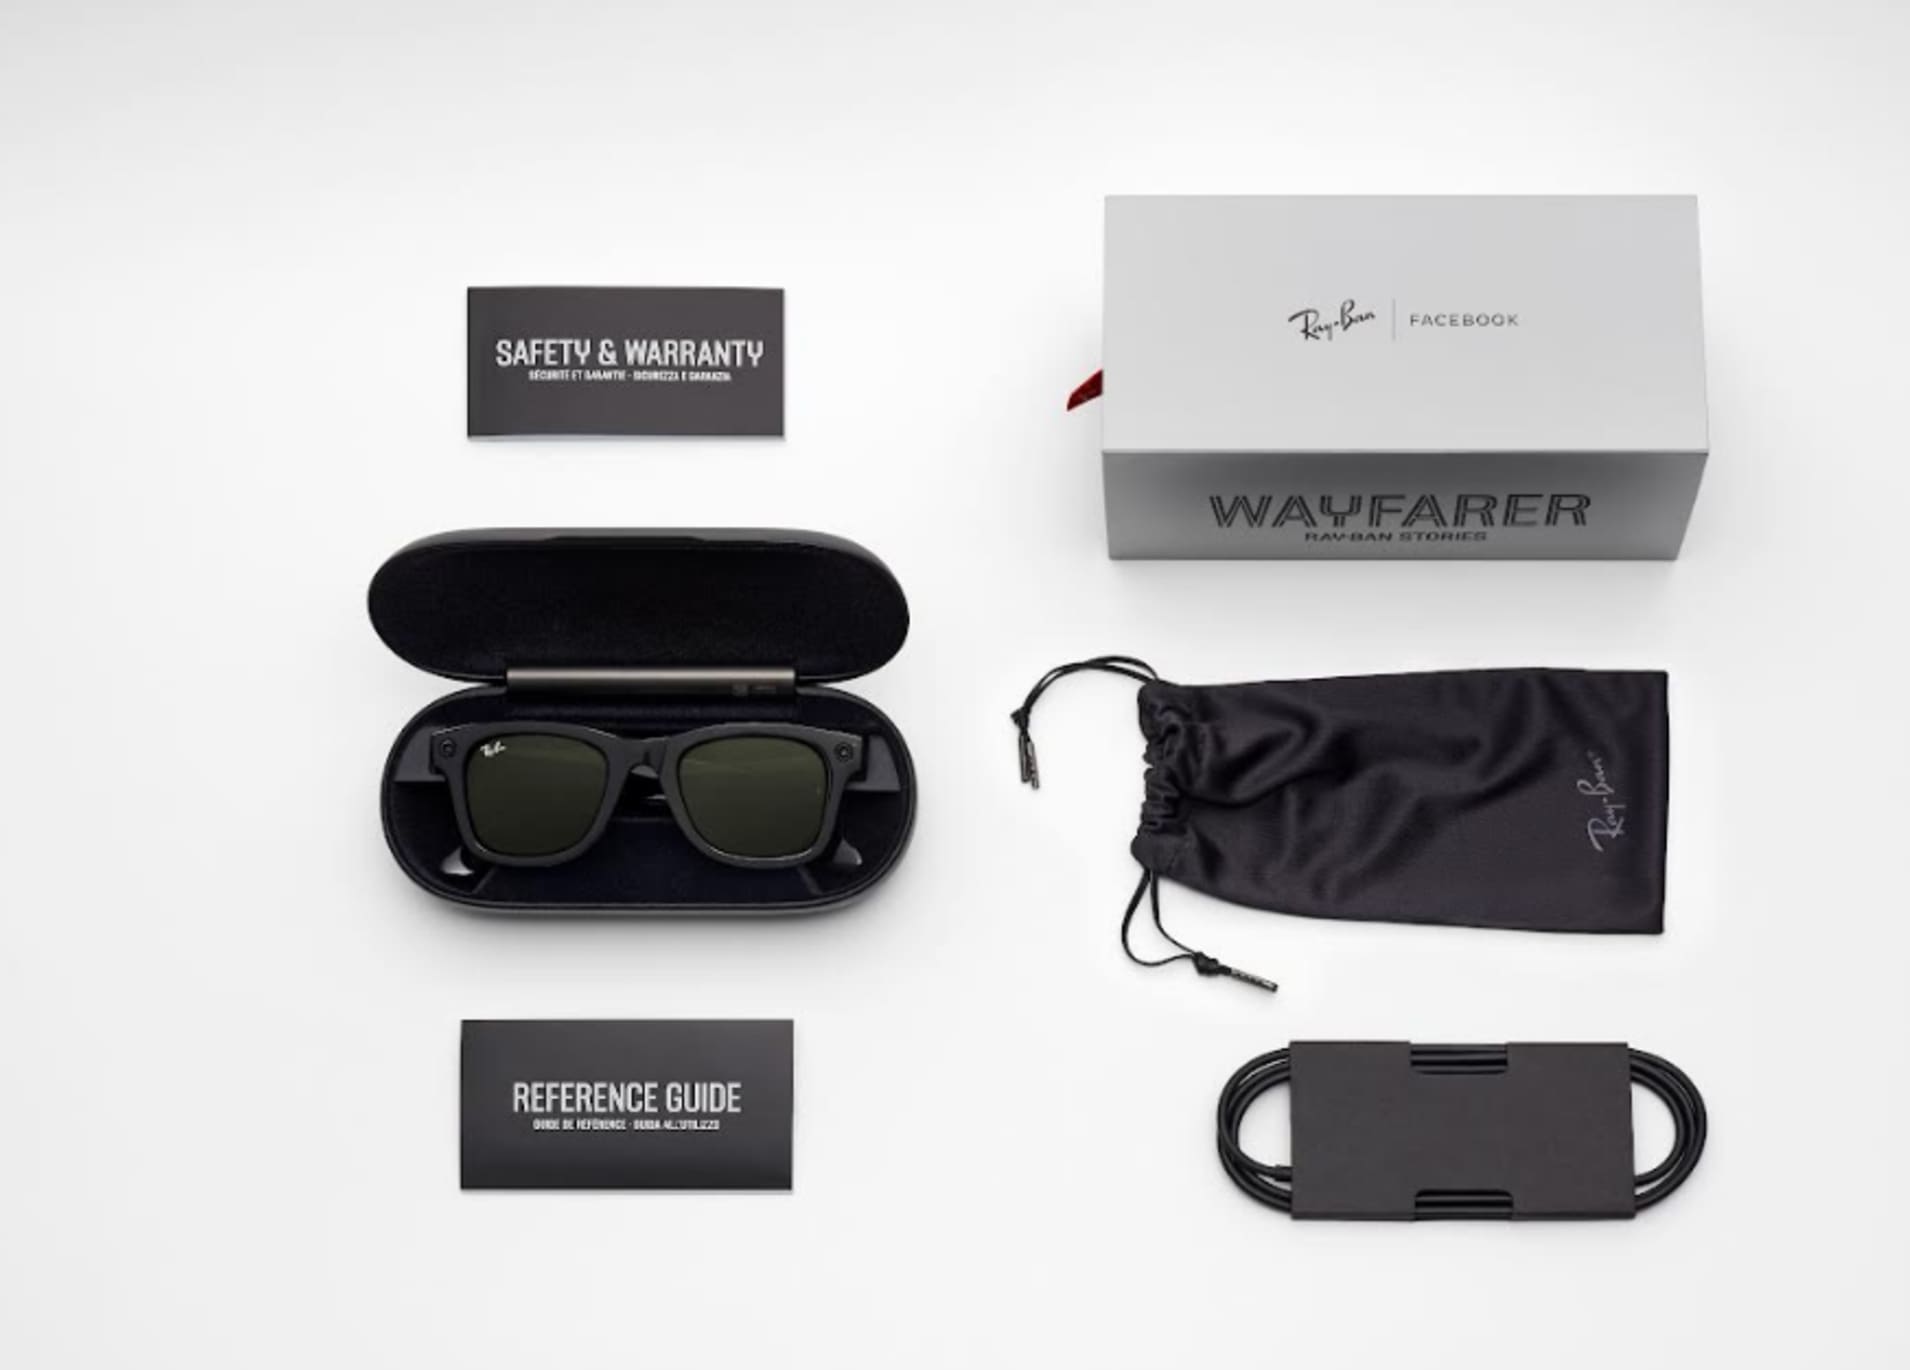 Facebook Ray-Ban Stories glasses